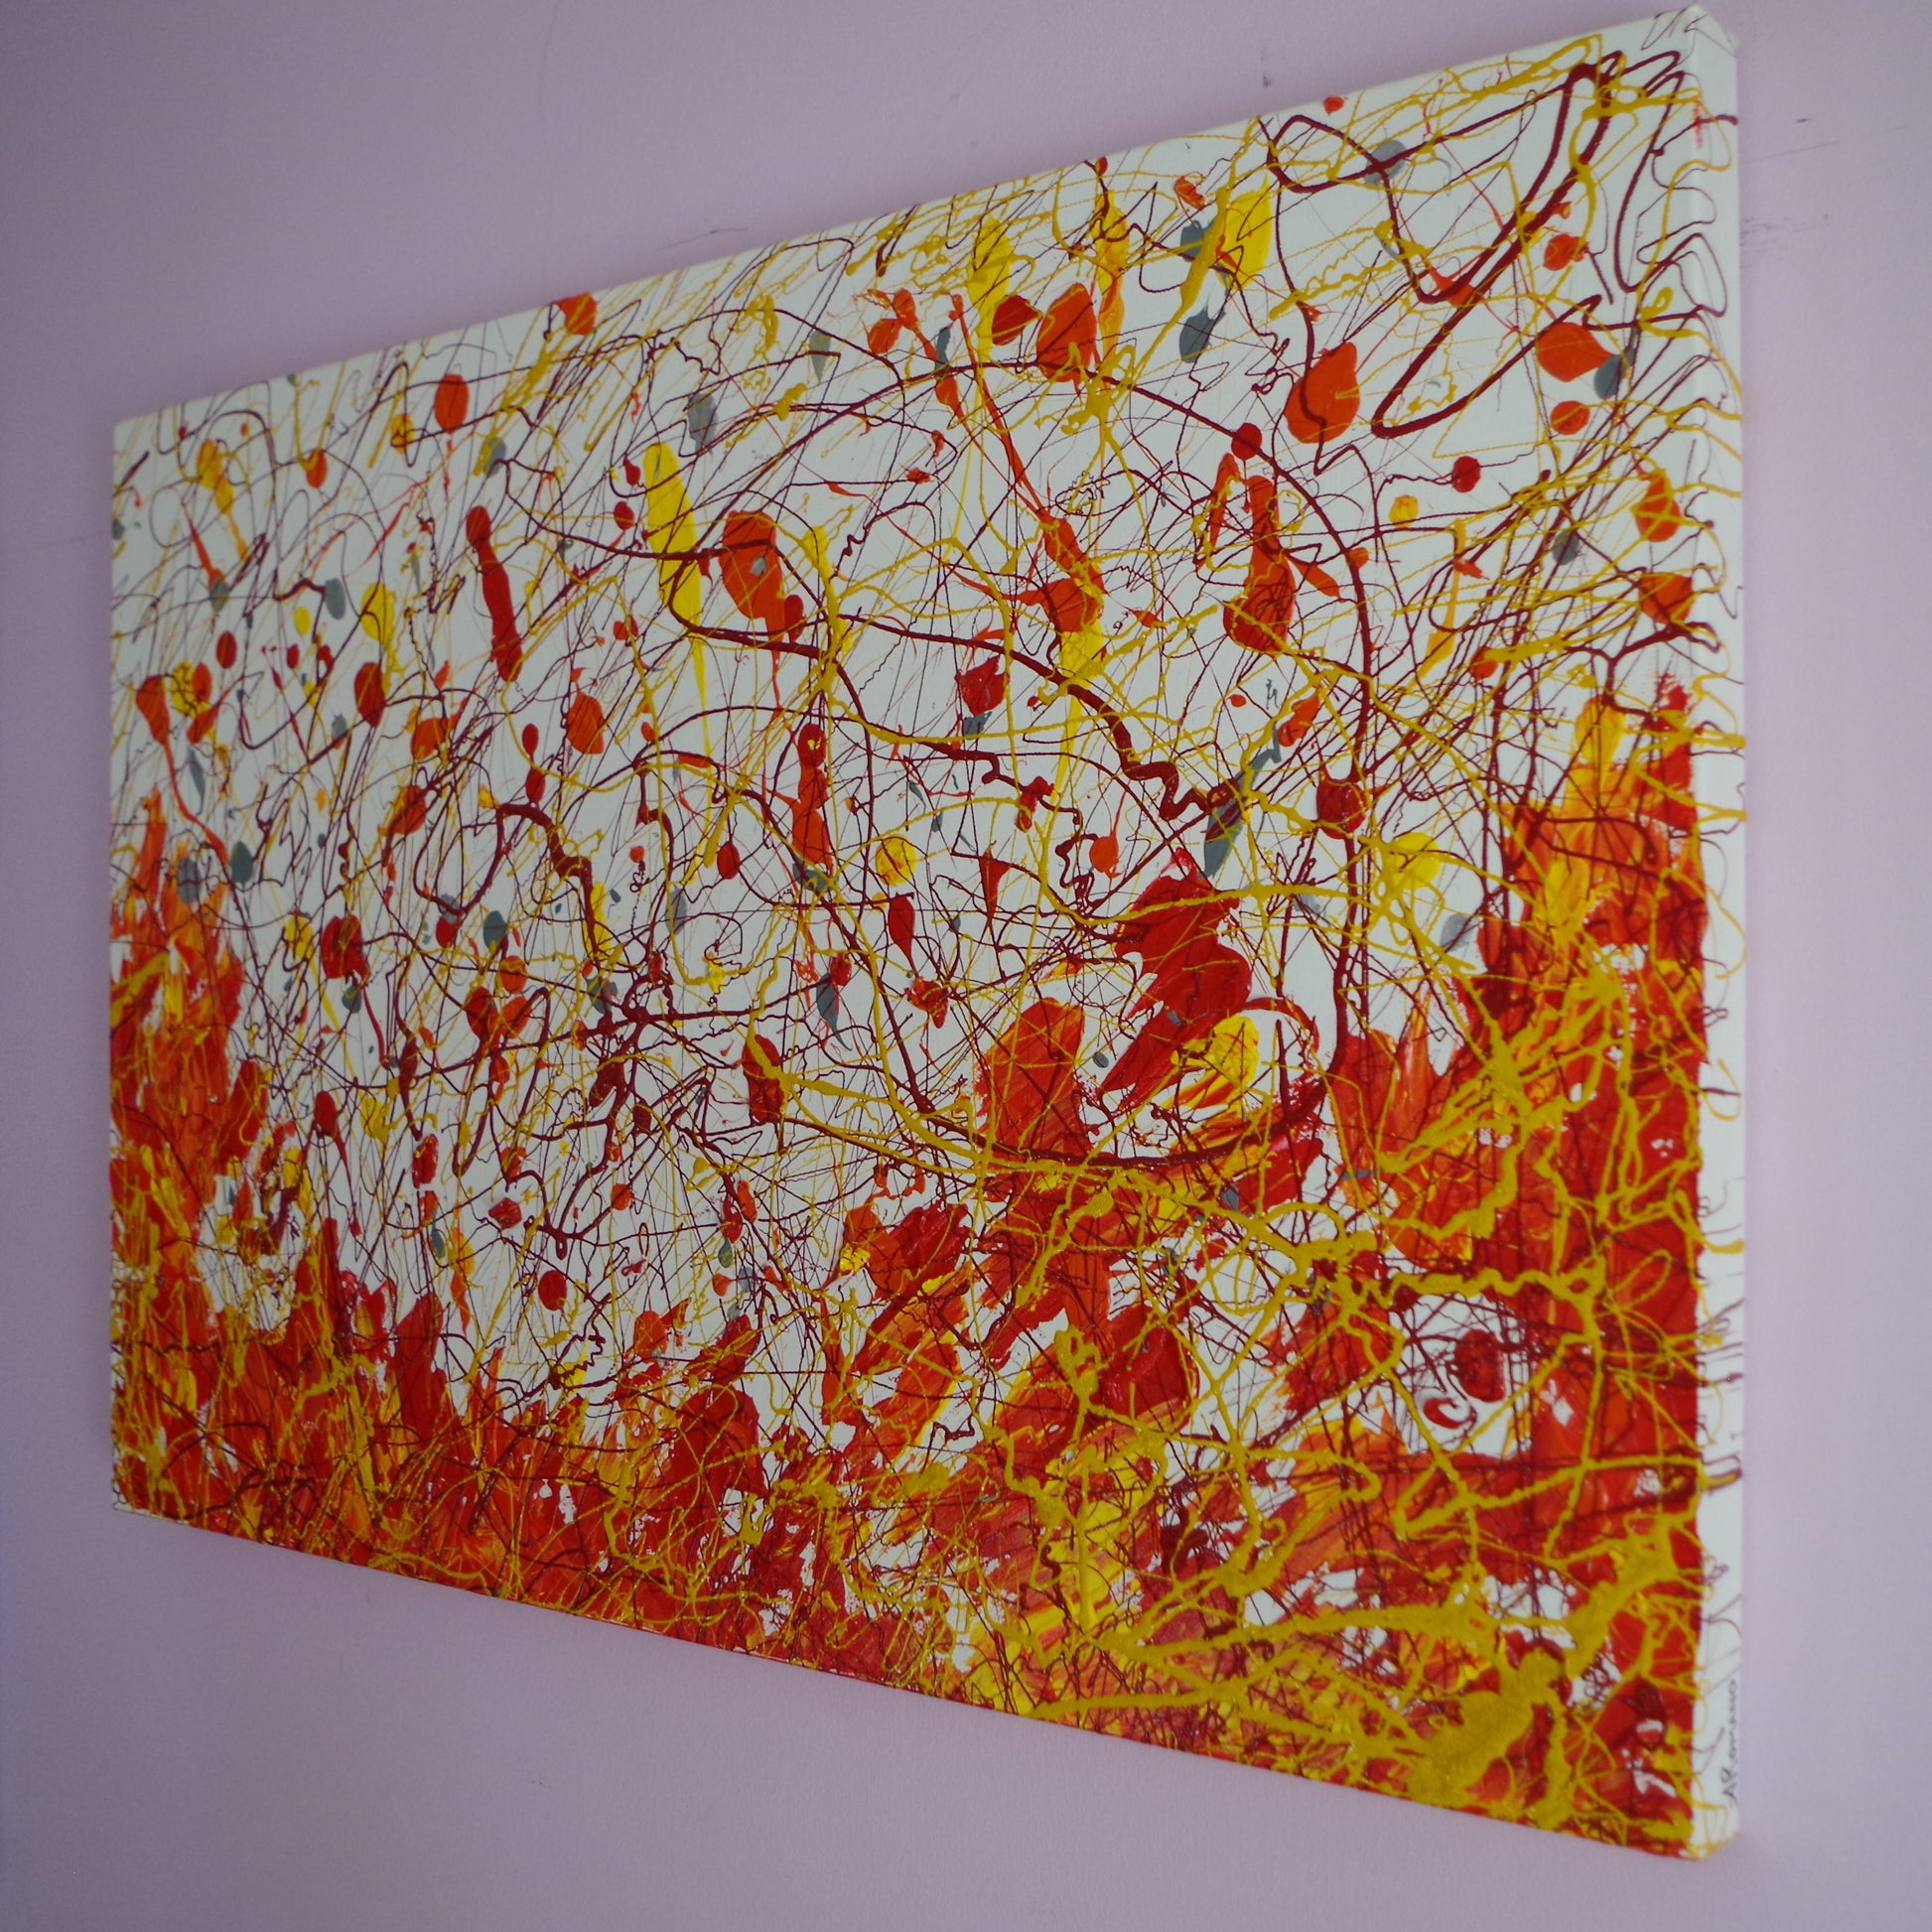 Fire-Dance-Alexandra-Romano-Bold-Contemporary-Action-Paintings-Sale-Buy-Abstract-Art-Online-Shopping-Toronto-Art-Gallery-Red-Yellow-Painting